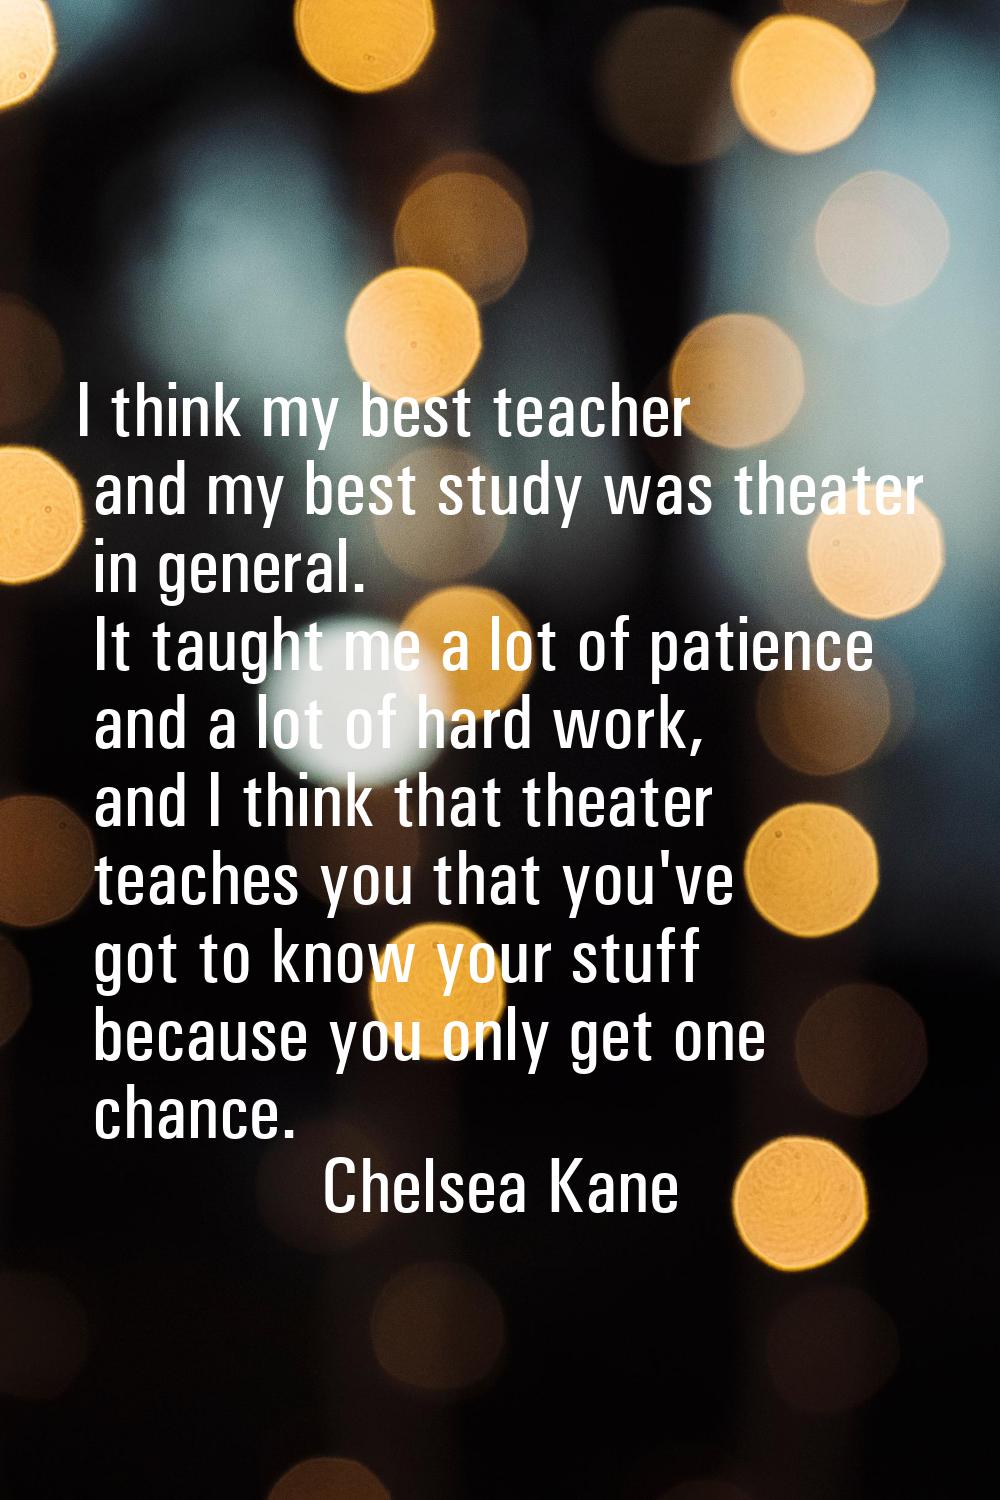 I think my best teacher and my best study was theater in general. It taught me a lot of patience an